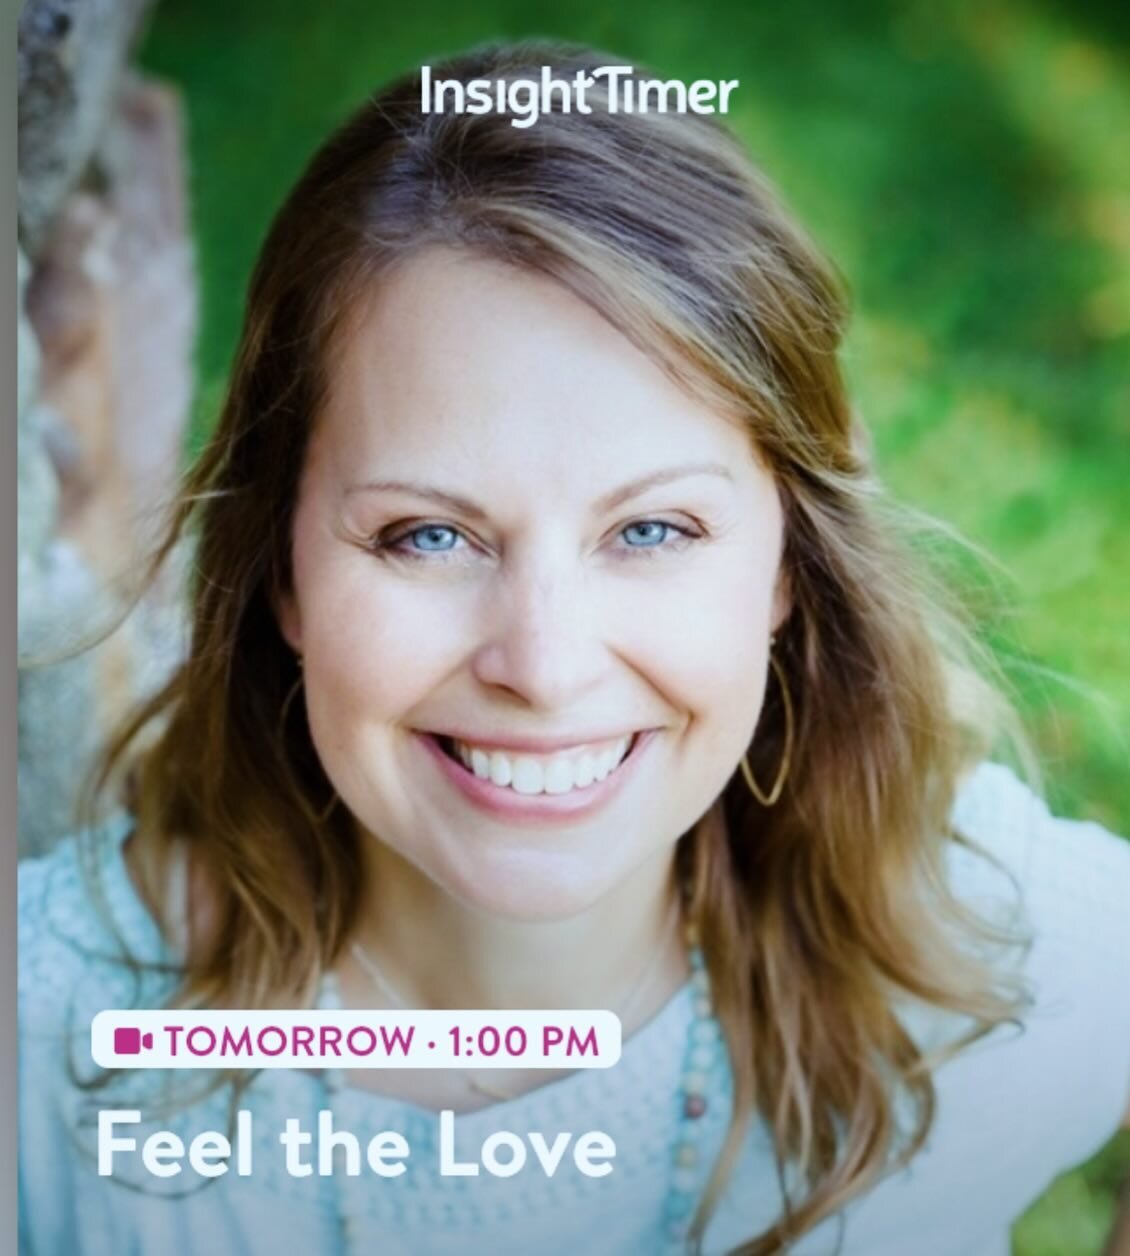 Please join for a gentle practice to cultivate and sense the love that is at the core of each of us.

We will experiment with &ldquo;feeling&rdquo; love for another, ourselves, and each other.

Link in bio. 

#love
#meditation 
#insighttimer 
#nurtur